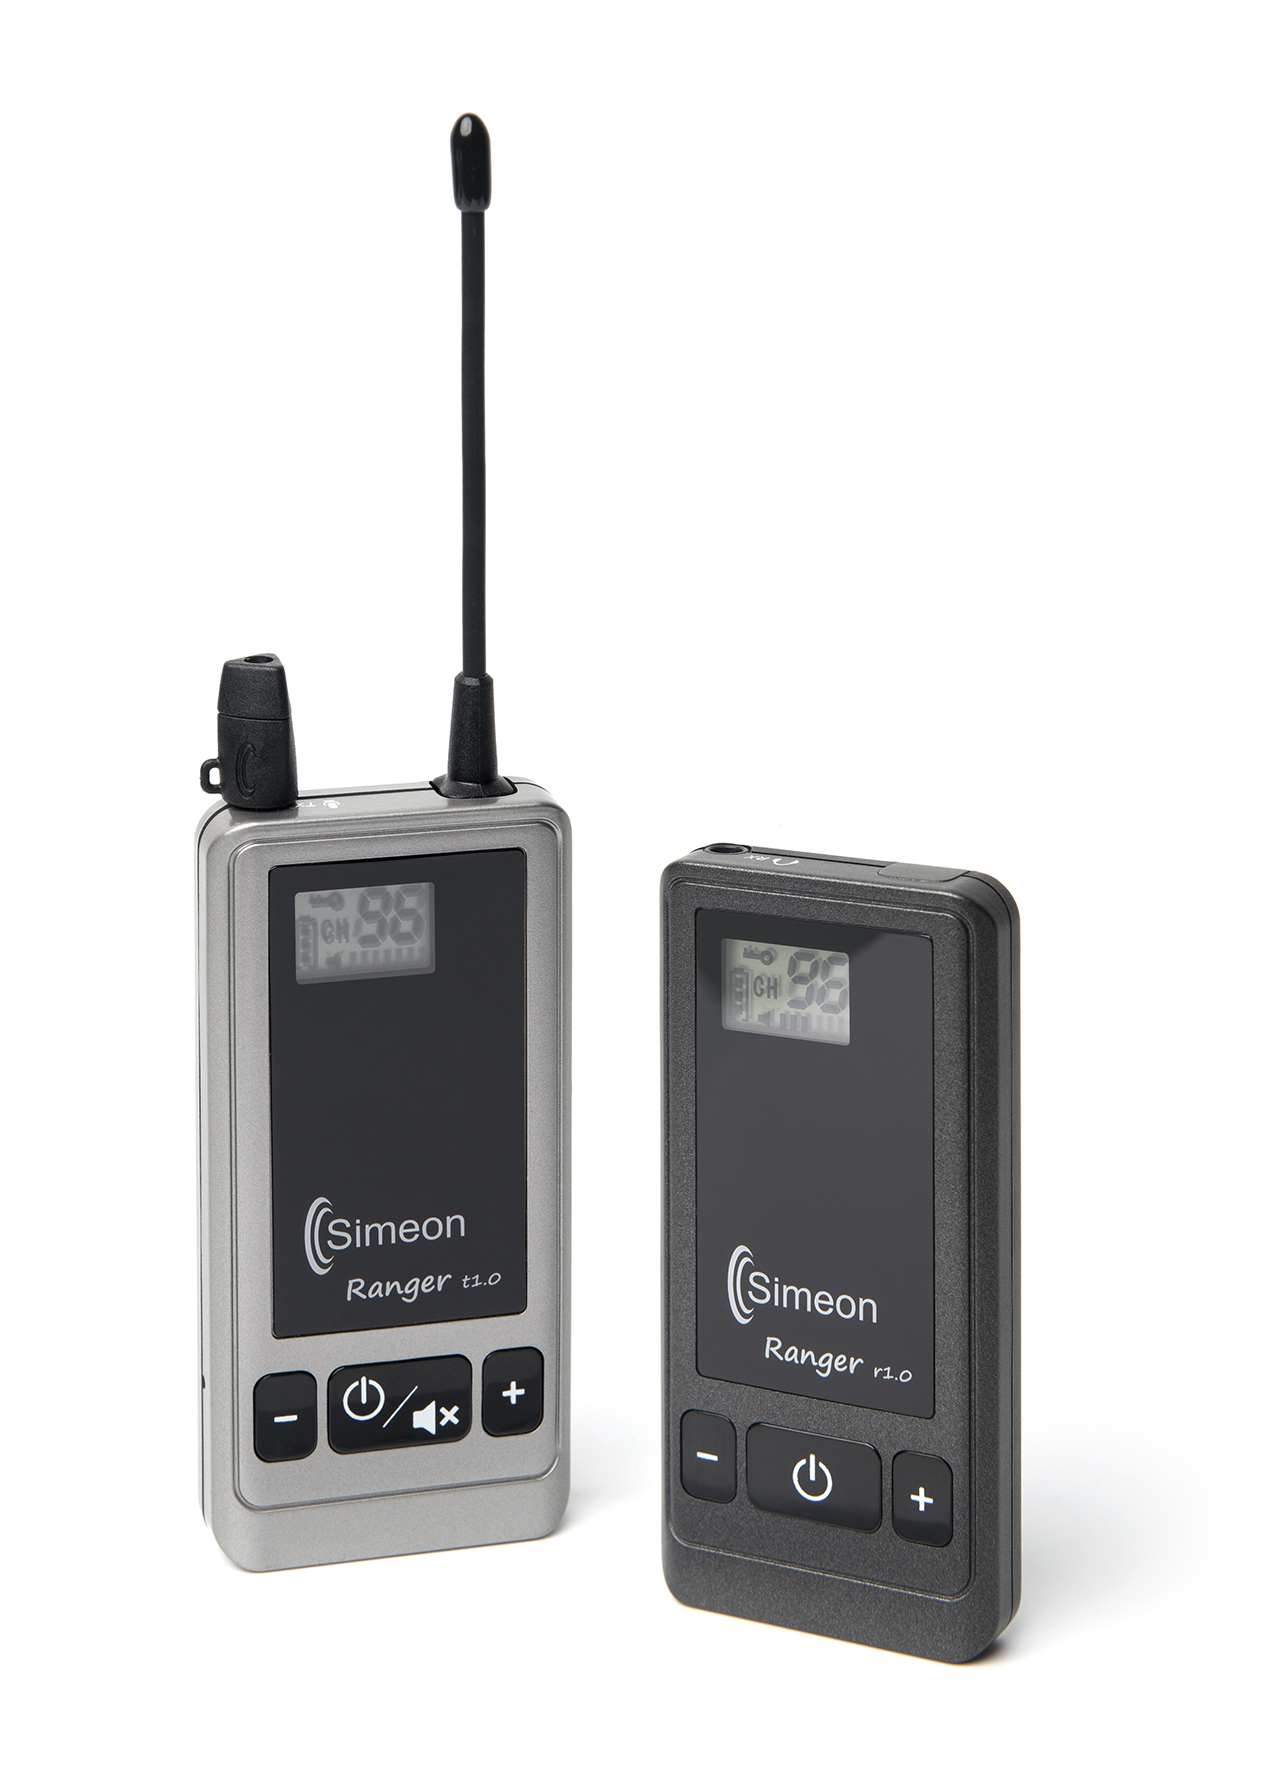 It is a wireless personal fm. Great for individuals with hearing loss, hard of hearing and or hearing difficulties. Simeon Ranger - wireless and portable personal fm device for listeners. Comes with a transmitter and receiver. 